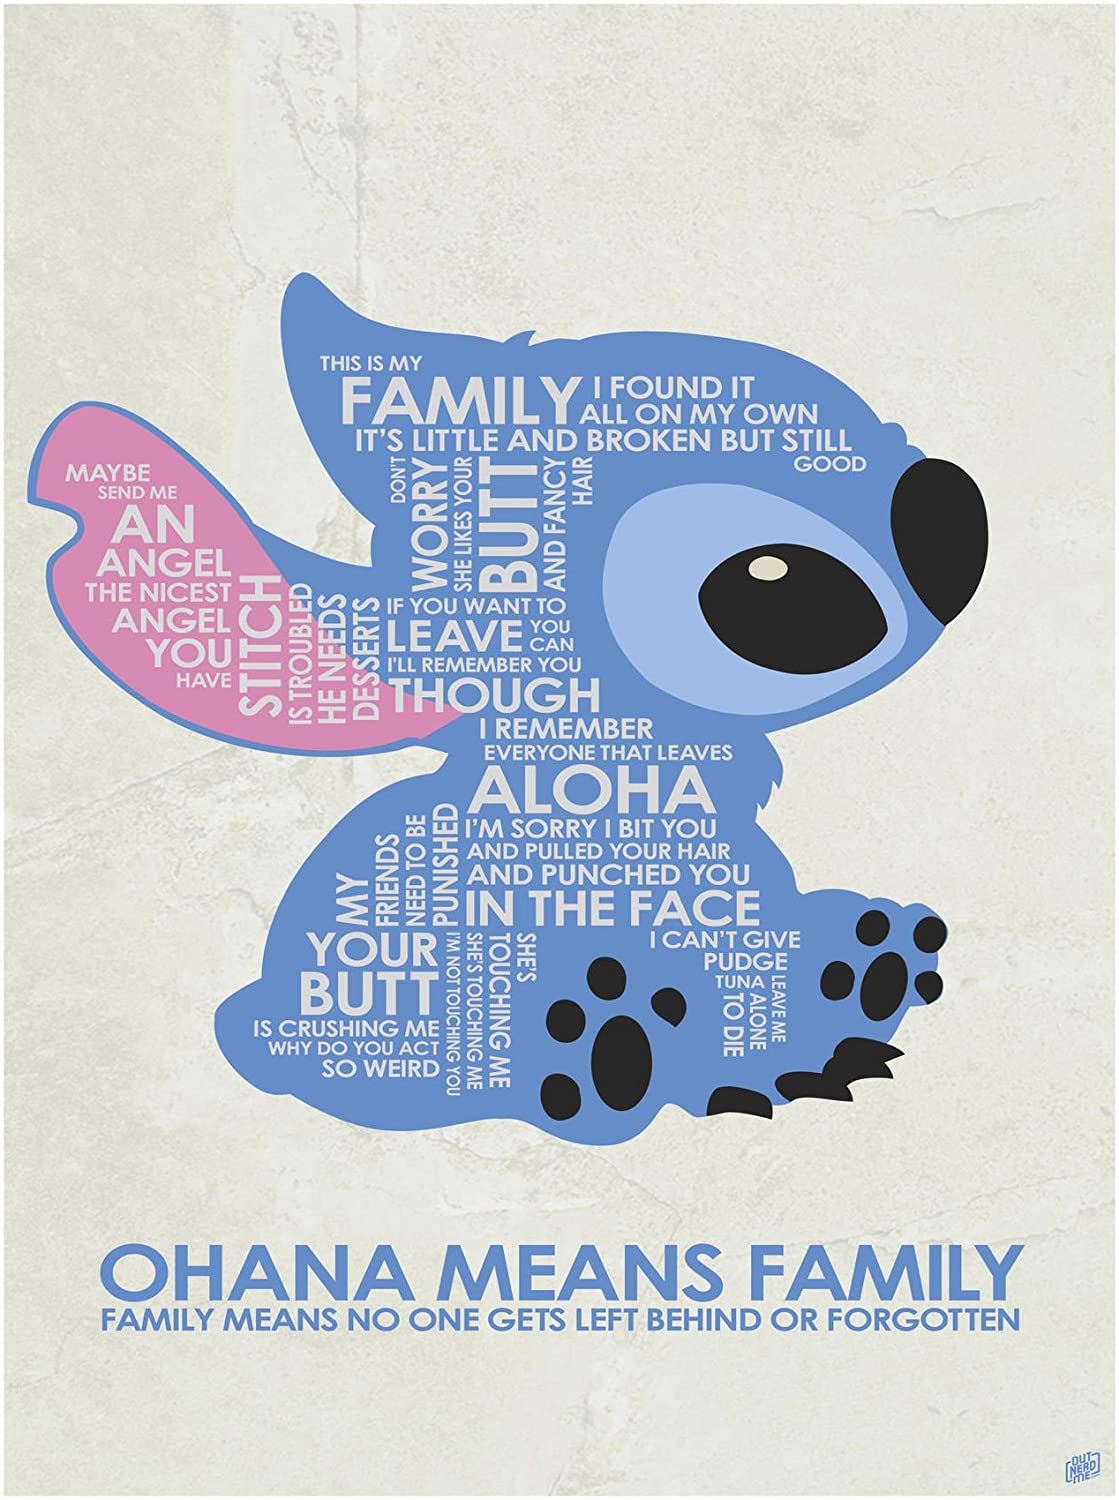 Ohana Means Family Word Art Print Poster by Artist Stephen Poon. 12 x 18 Home & Kitchen Wall Art